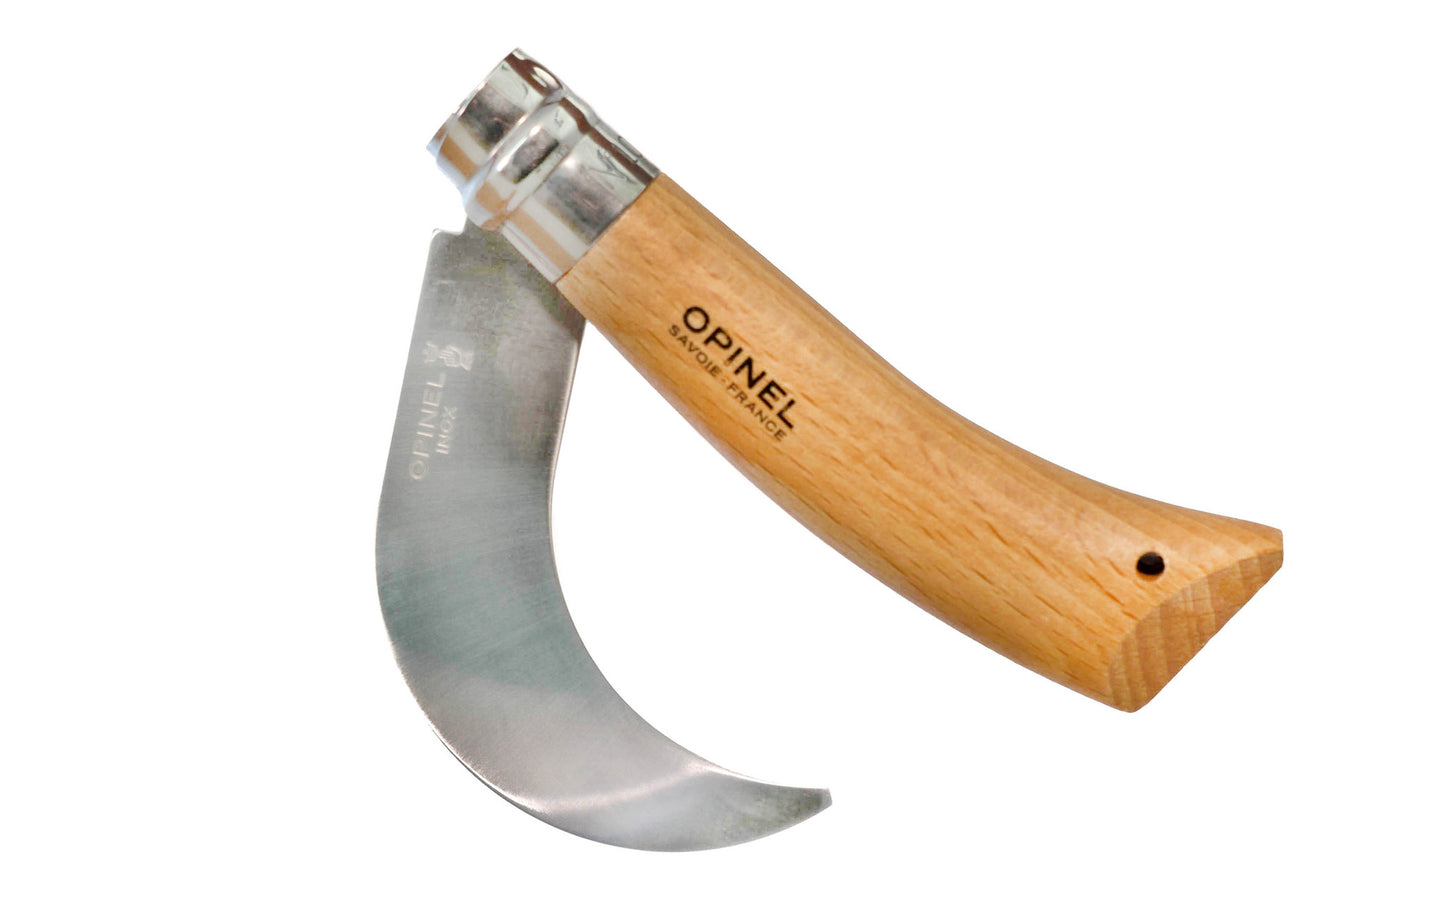 Opinel Stainless Steel No. 10 Pruning Knife ~ Foldable Blade ~ Made in France ~ 3-1/4" long foldable blade with stainless locking collar ~ Made of 12c27 Sandvik stainless steel ~ Beechwood handle ~ Specially curved blade